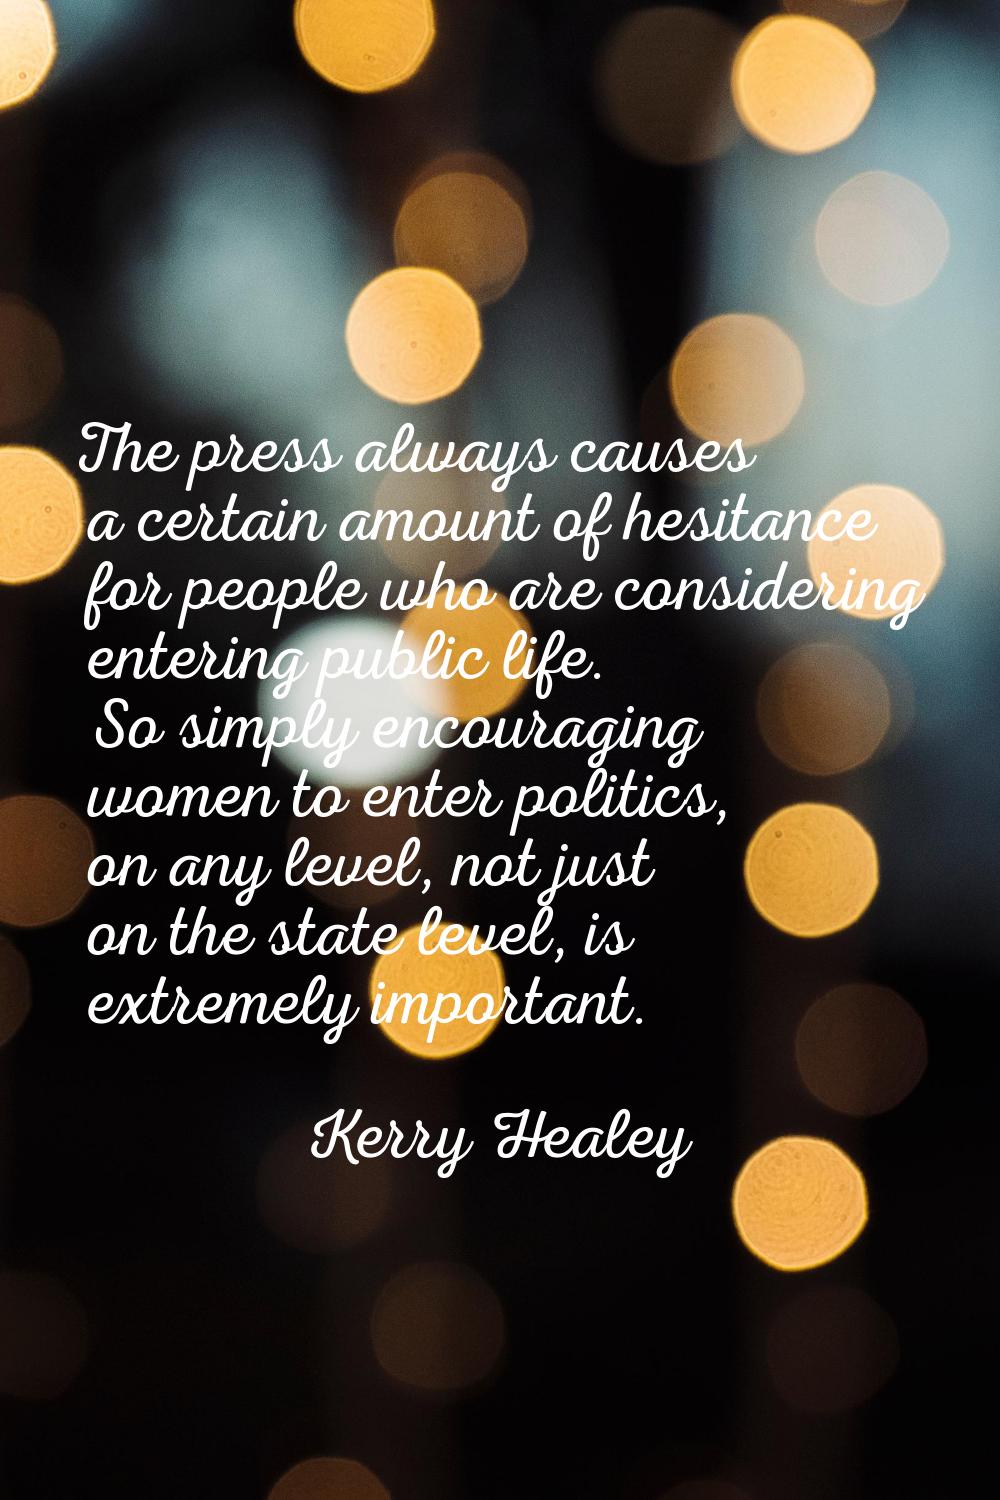 The press always causes a certain amount of hesitance for people who are considering entering publi